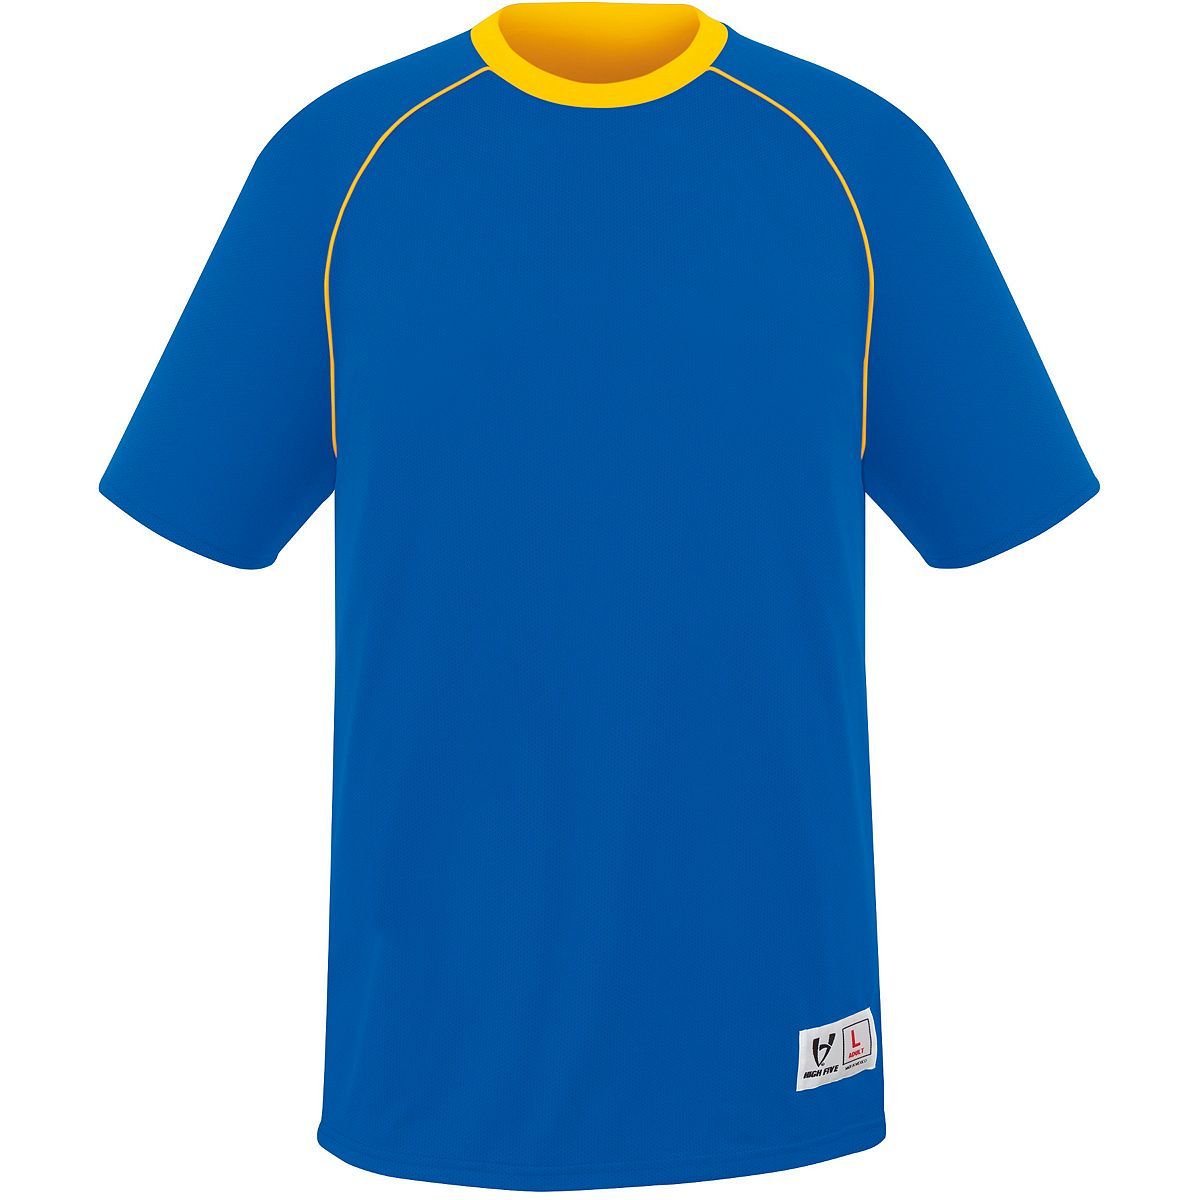 High 5 Conversion Reversible Jersey in Royal/Athletic Gold  -Part of the Adult, Adult-Jersey, High5-Products, Soccer, Shirts, All-Sports-1 product lines at KanaleyCreations.com